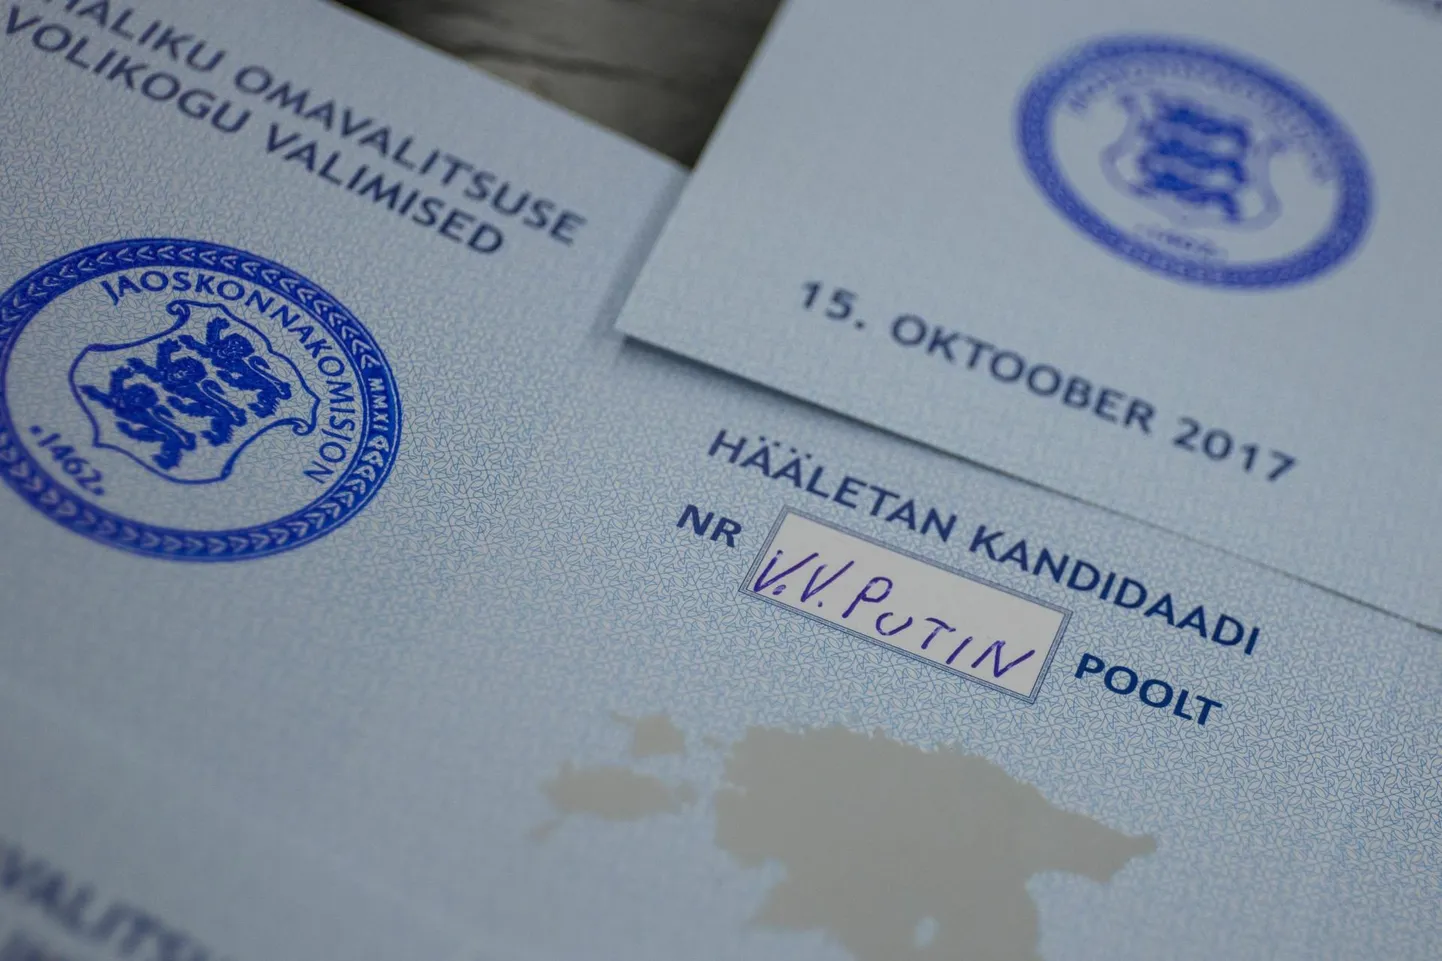 Invalid election tickets for municipal elections in Tallinn.